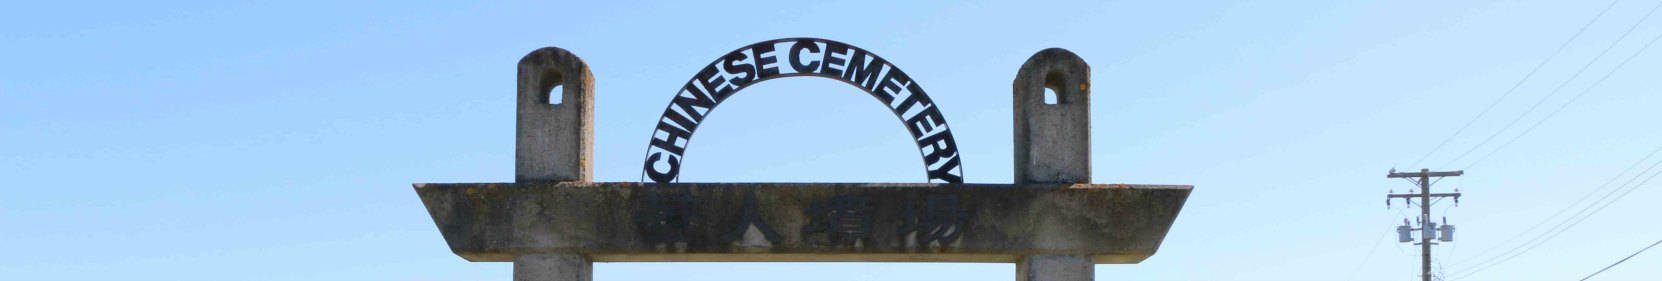 our web header image for the Chinese Cemetery at Harling Point. It shows the entrance gate to the cemetery